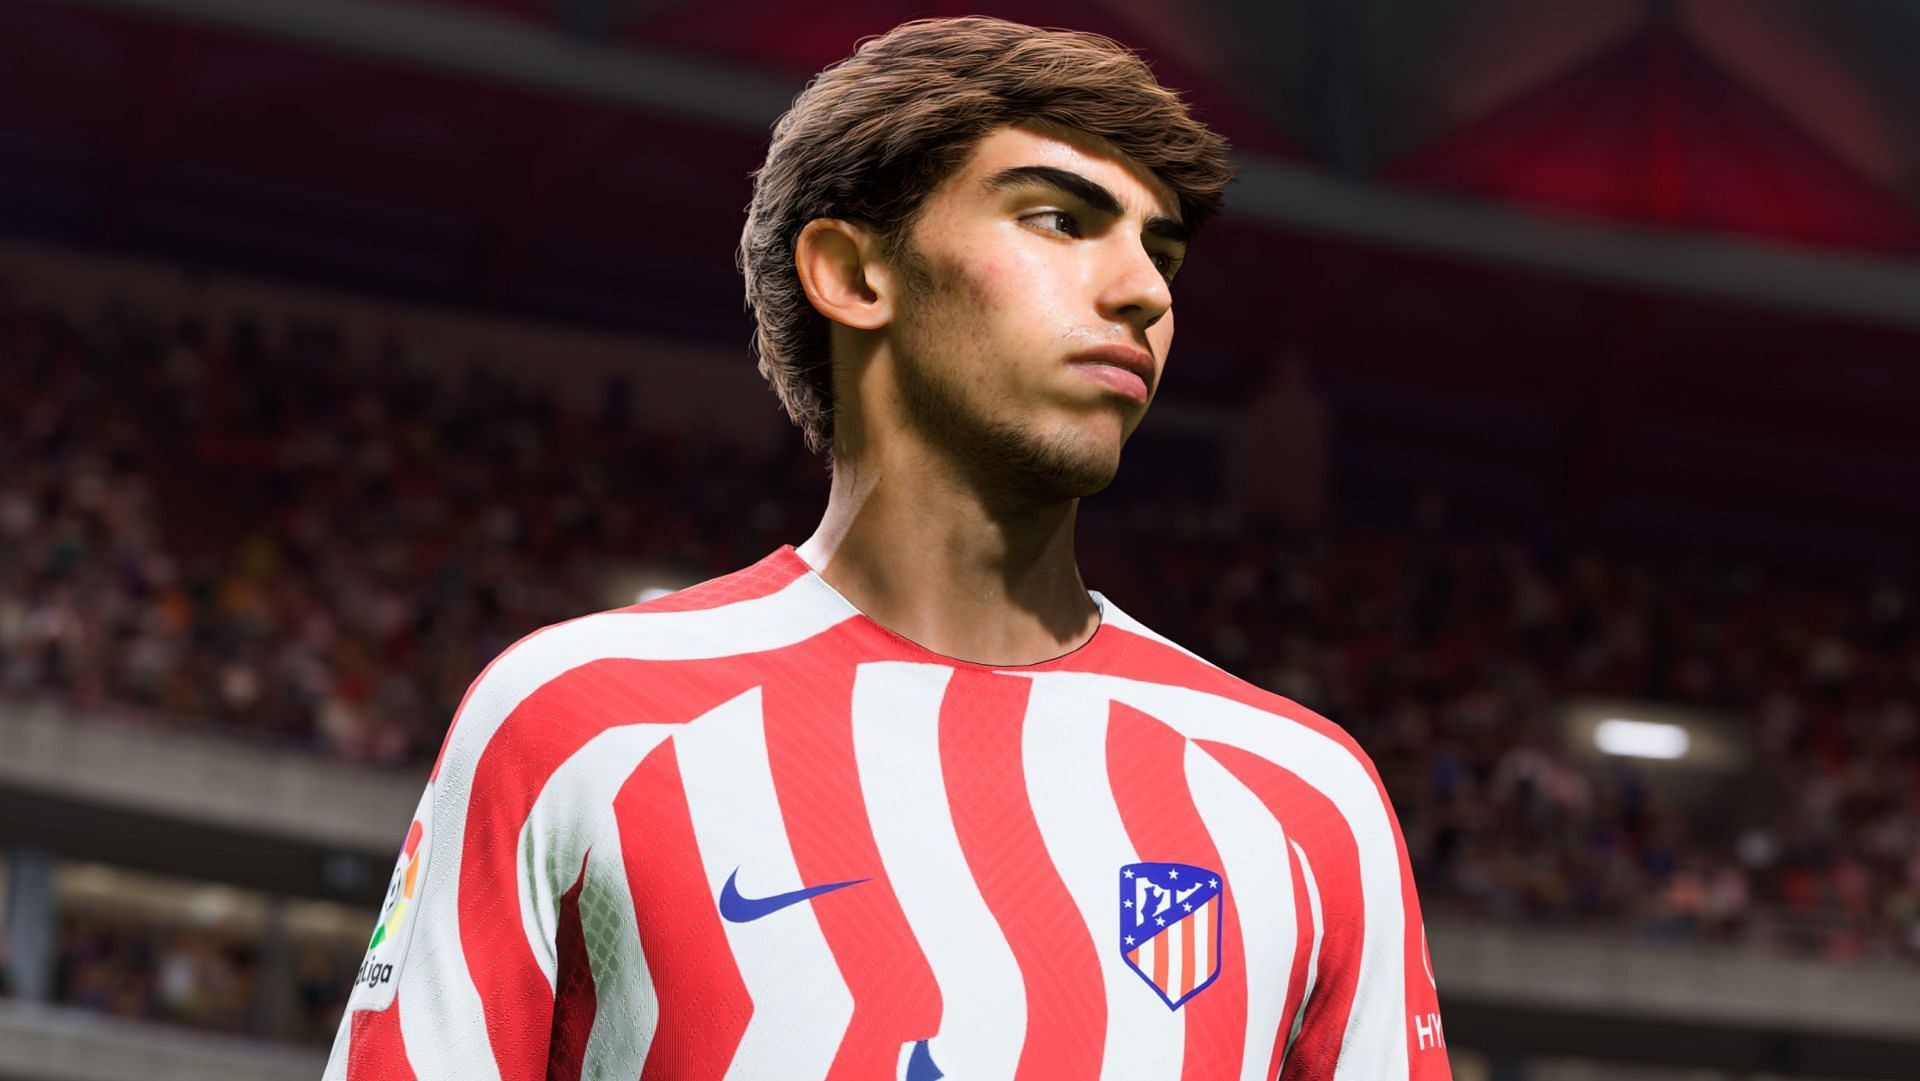 FIFA 22 PC System Requirements - Minimum & Recommended Specs